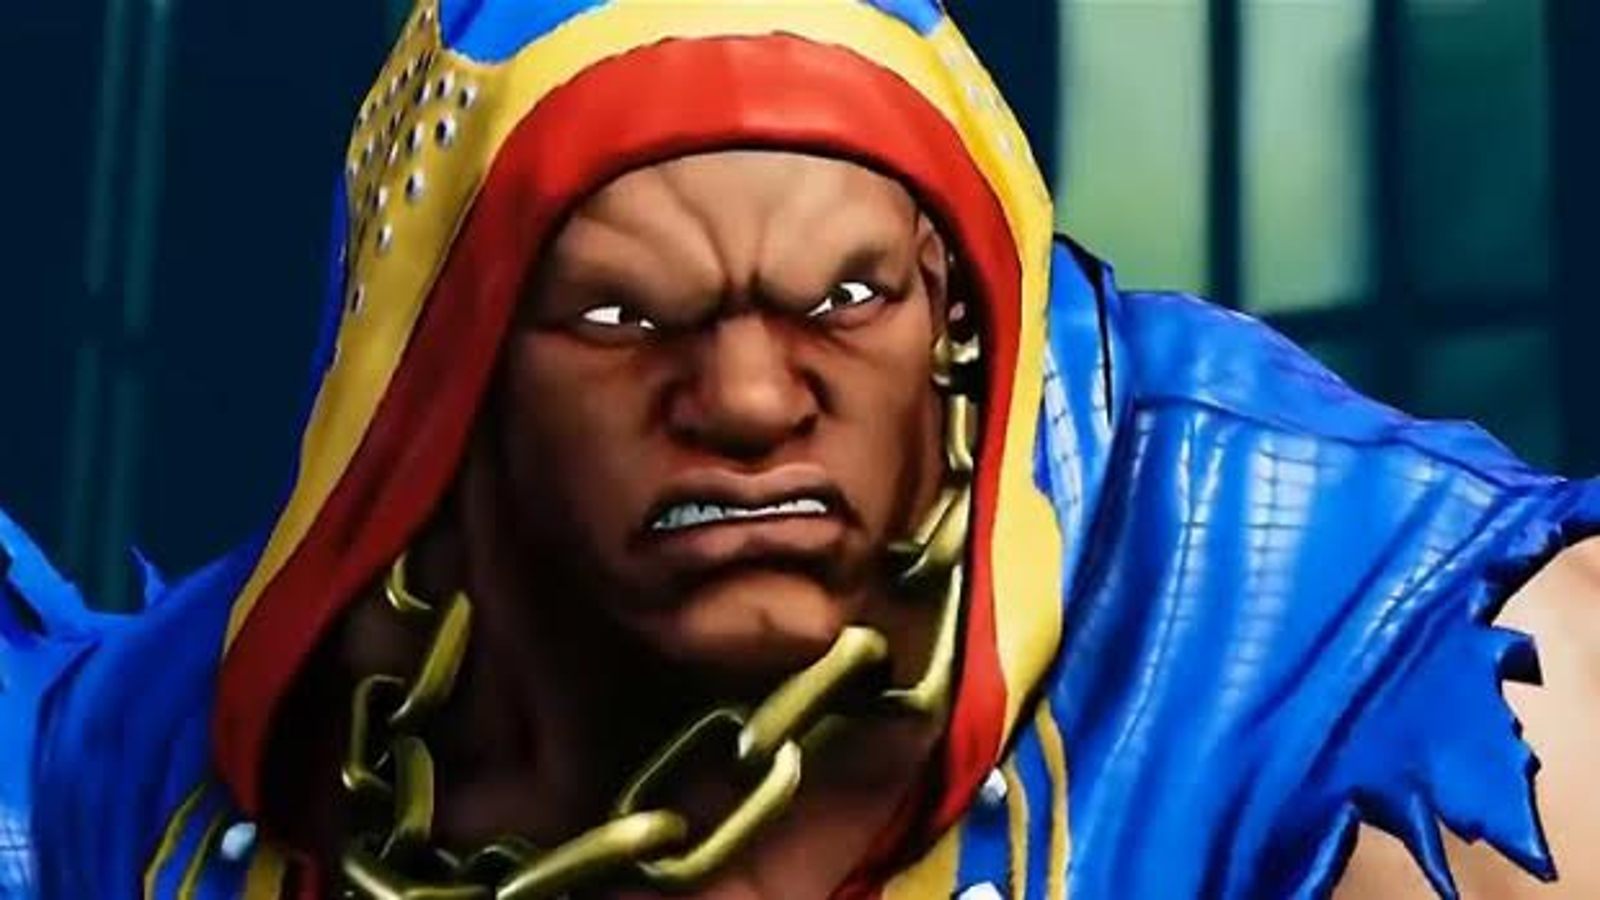 Ending for Street Fighter The Movie-Balrog (Sony Playstation)